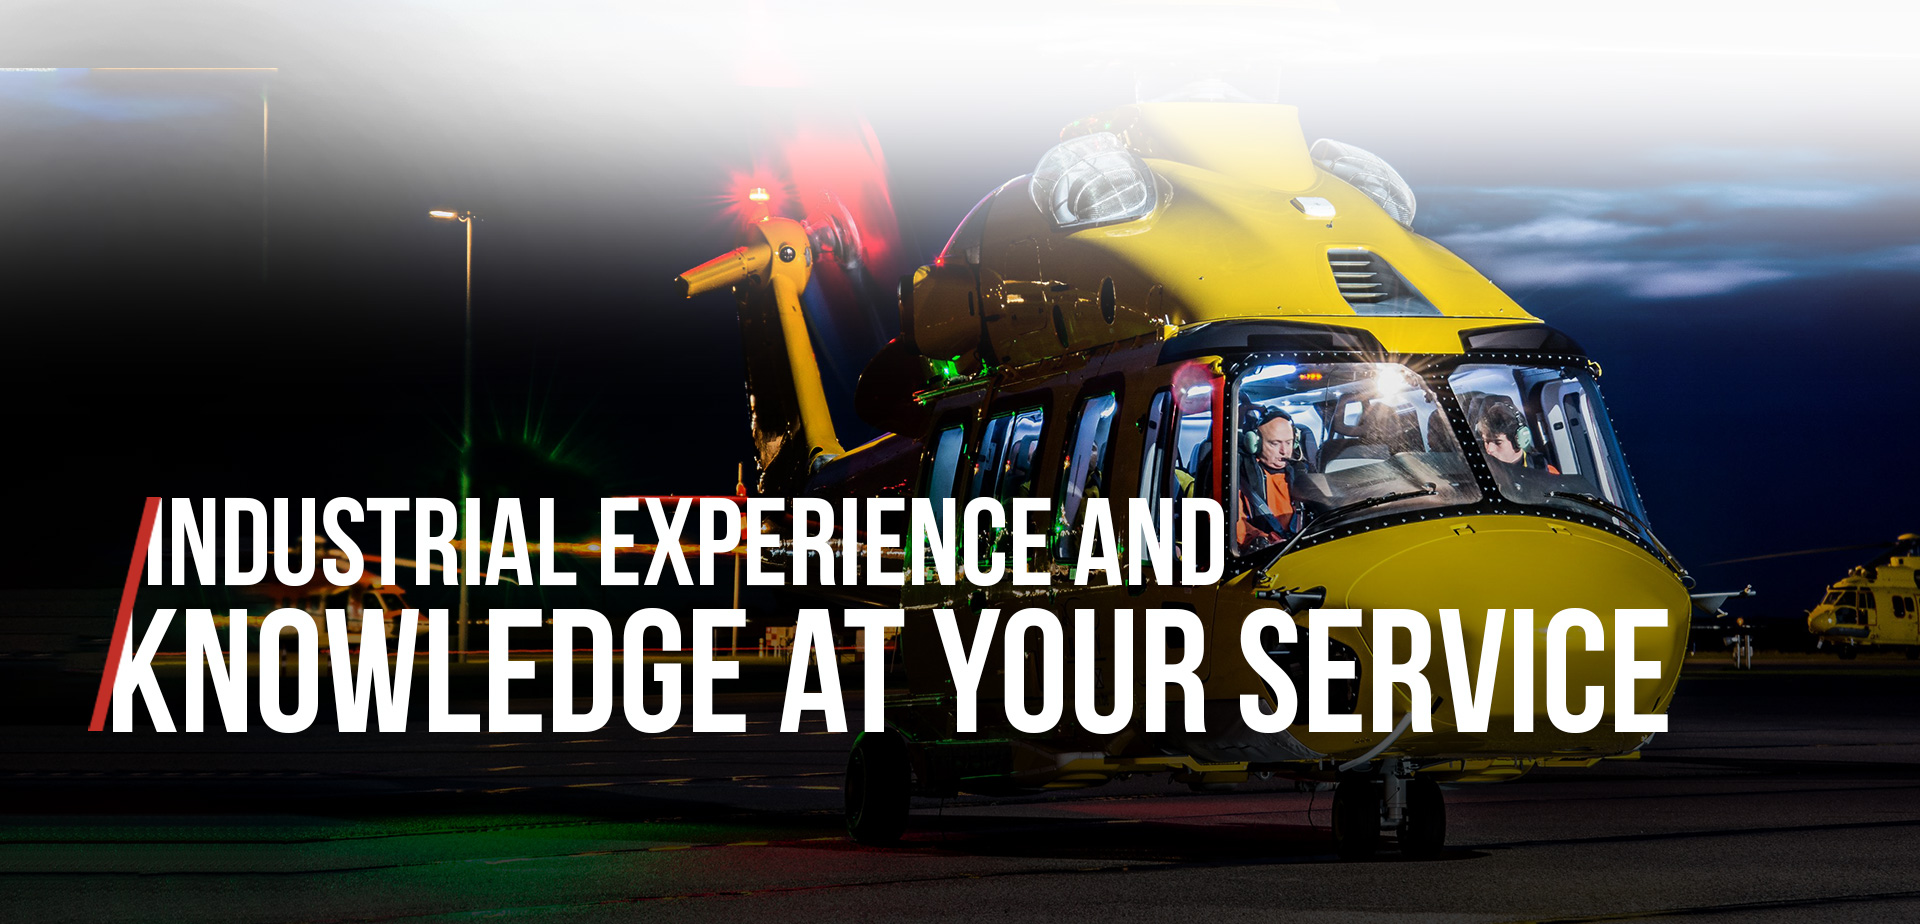 Industrial experience and knowledge at your service mobile